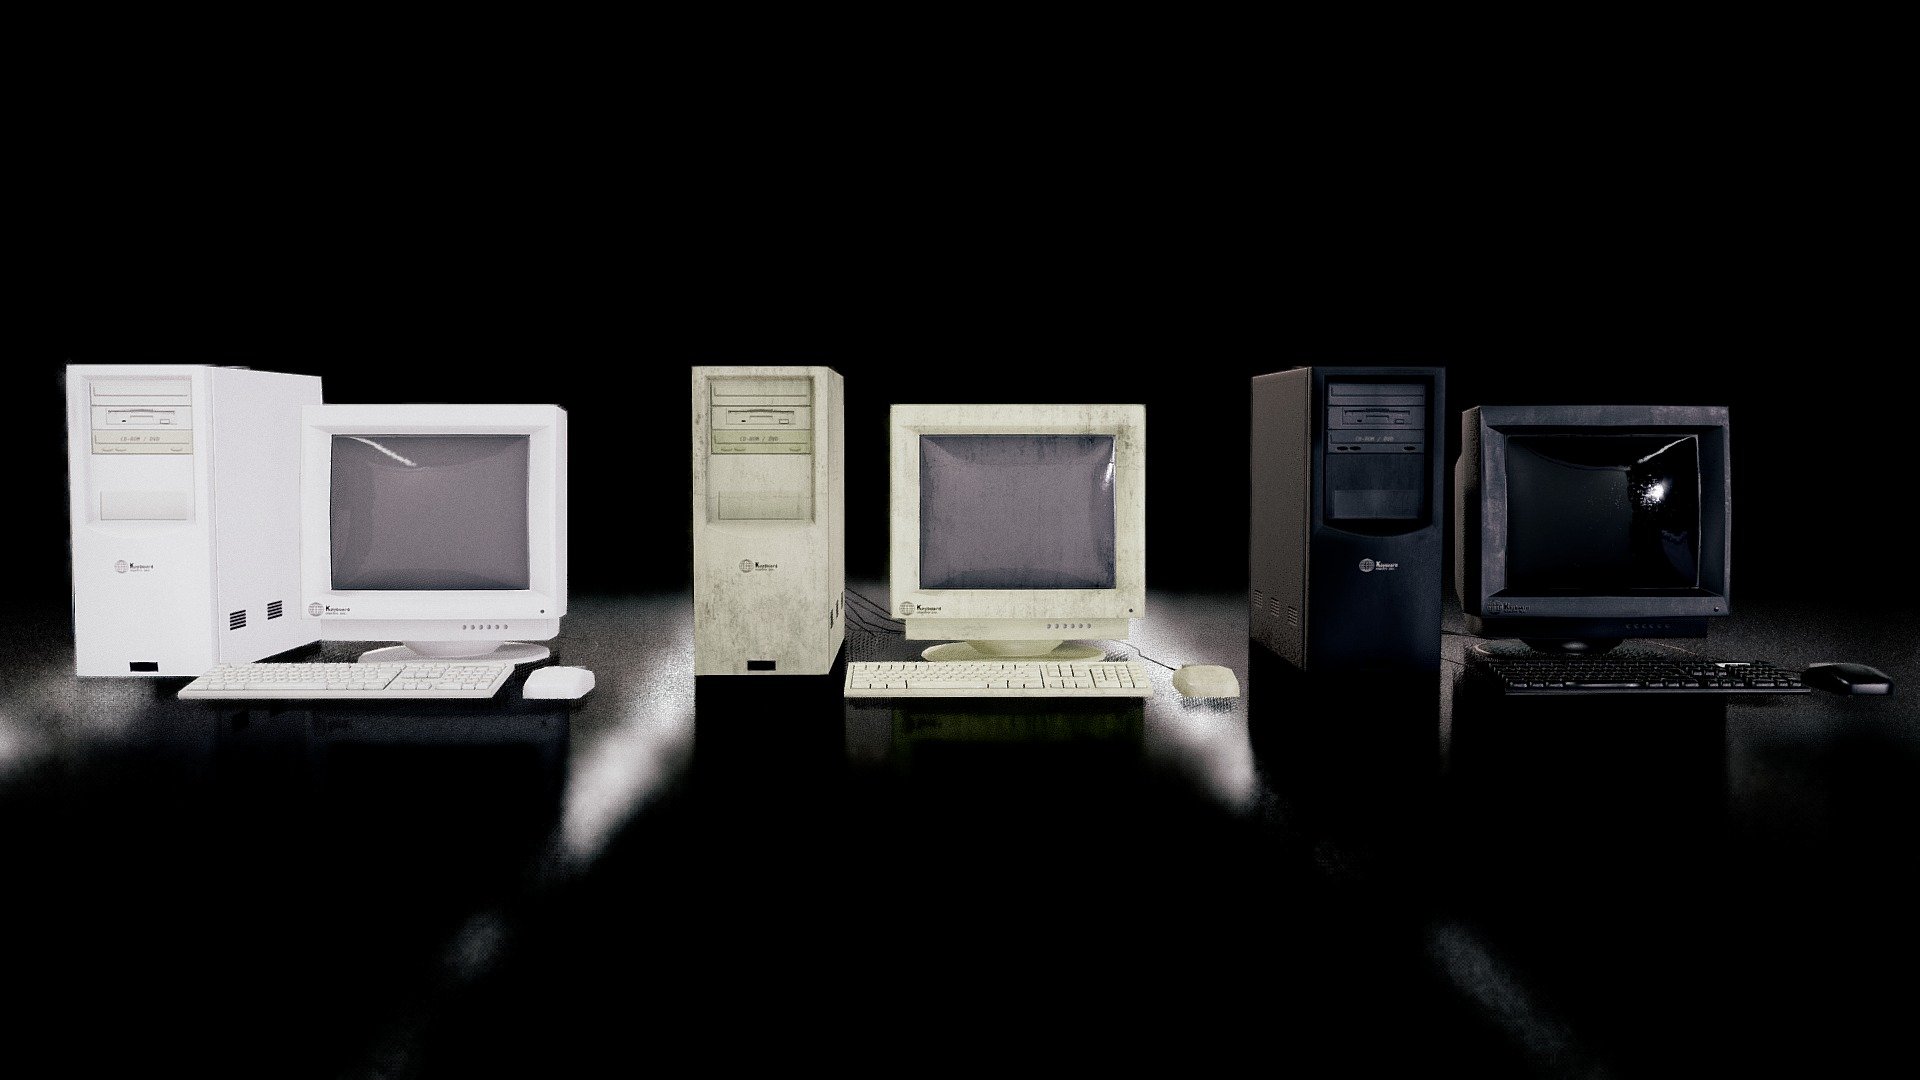 Retro computers pack
-

THE PACK

In this pack you'll find a complete computer set with :




monitor

computer

keyboard

mouse

cables

-

DEMO

You can see an animated demo of this model right here : https://skfb.ly/6yBFt

You can see more details here : https://skfb.ly/6yCrB

-

PBR

There are three textures variatons for each mesh, in 2048px, 1024px or 512px, each in PBR (diffuse, roughness, metalness, normal map). For some textures, you can use the same maps and just change the diffuse one. Don't forget to check the model without filters before buying.

-

USE

The model could be used in real time application like VR, AR or games, the mesh was triangulate, too (if you want the model in quads, you can download the additional file).

-

SOFTWARES

Made with Blender and Photoshop.

-

MORE

Don't forget to subscribe for more ! If you have any question or issue, tell me in the comments section below and I'll do my best :) - Low poly Retro computers #2 - Store pack - Buy Royalty Free 3D model by Mickael Boitte (@boittemike1) 3d model